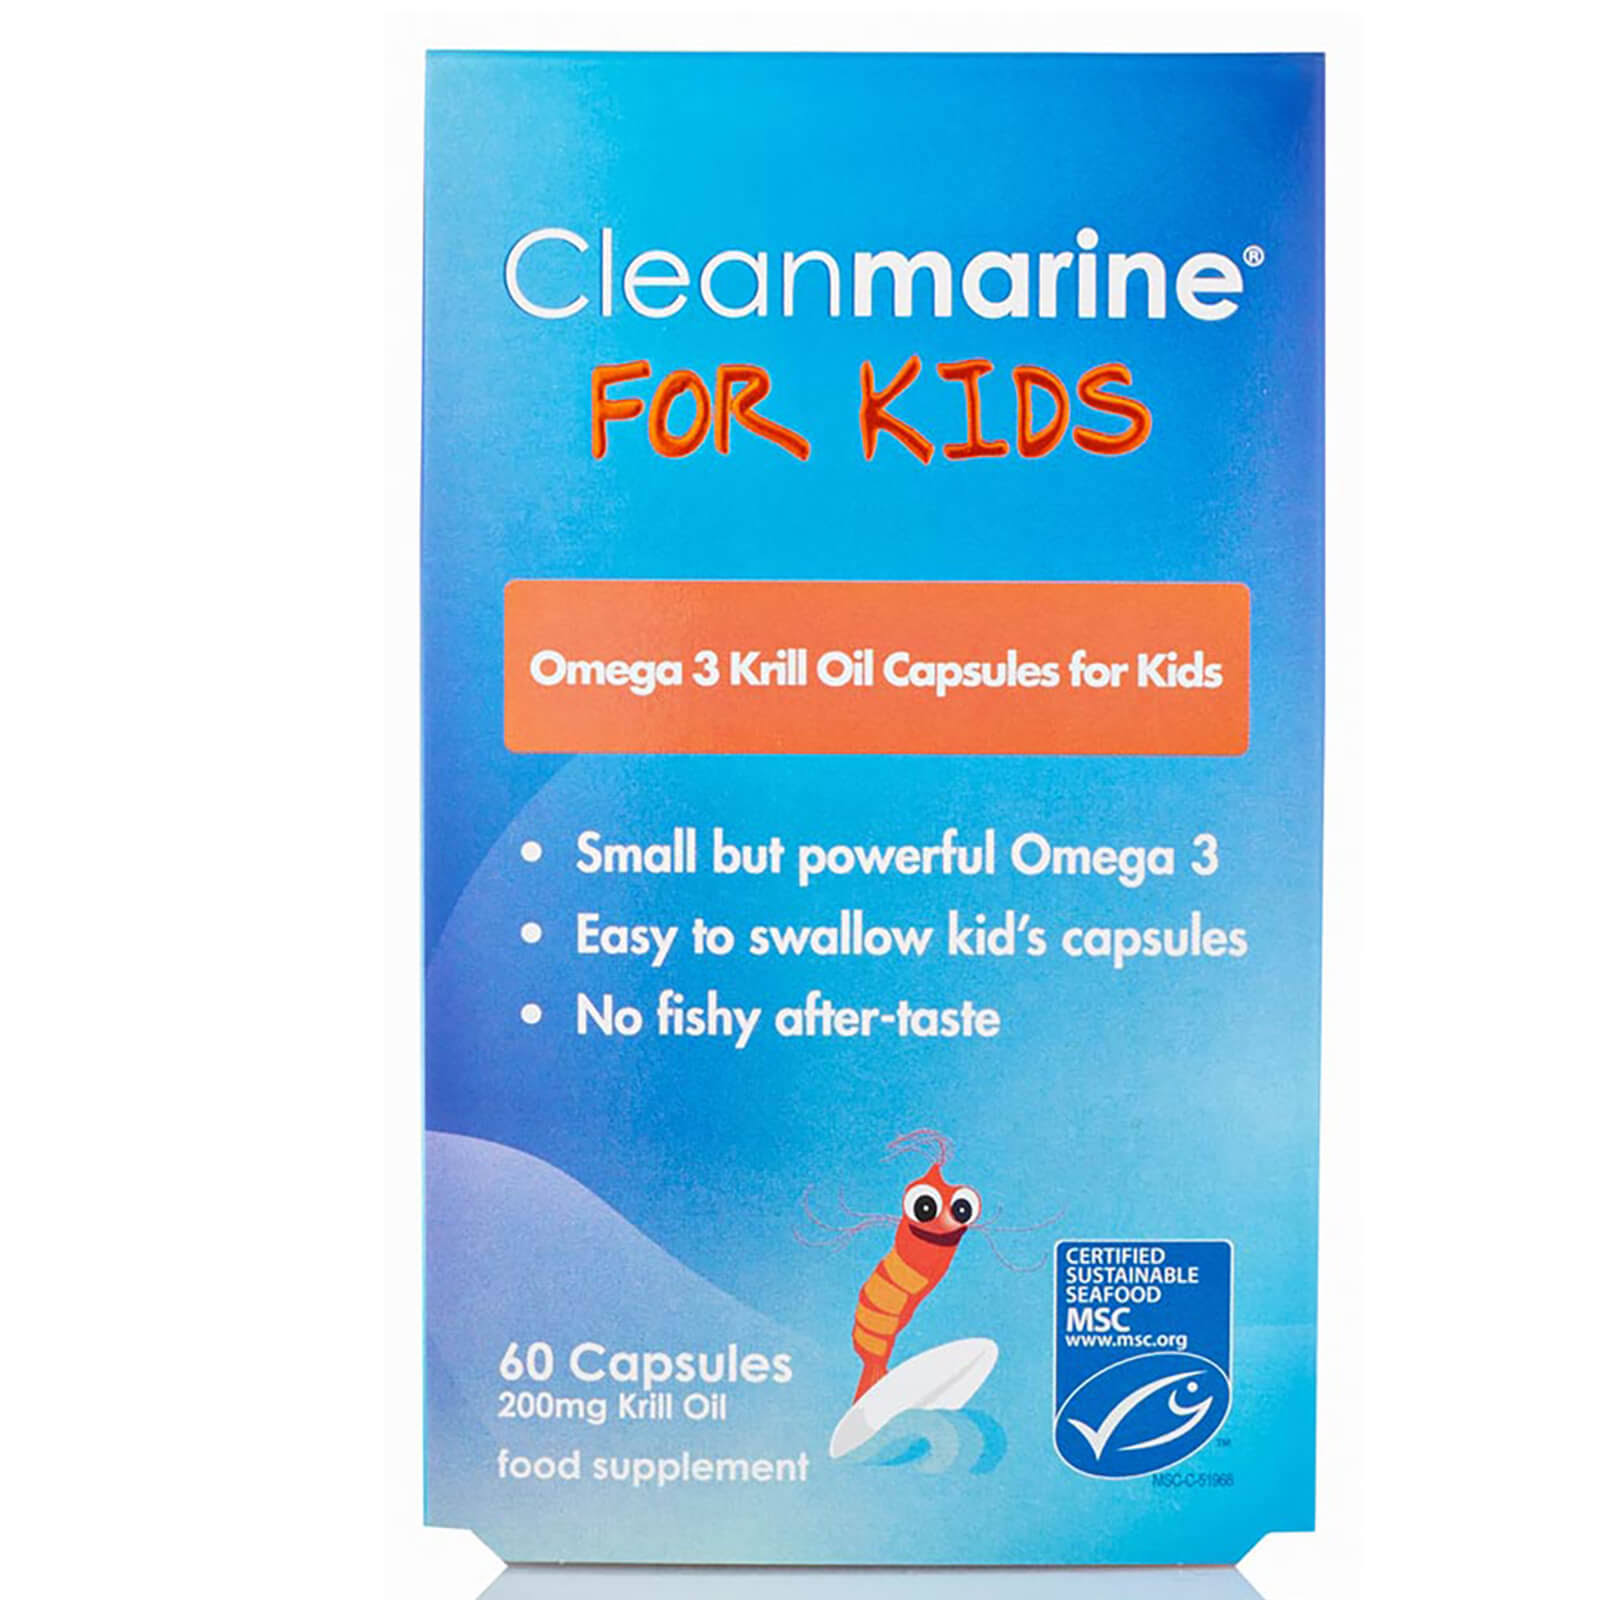 CleanMarine Krill Oil for Kids - 60 Capsules